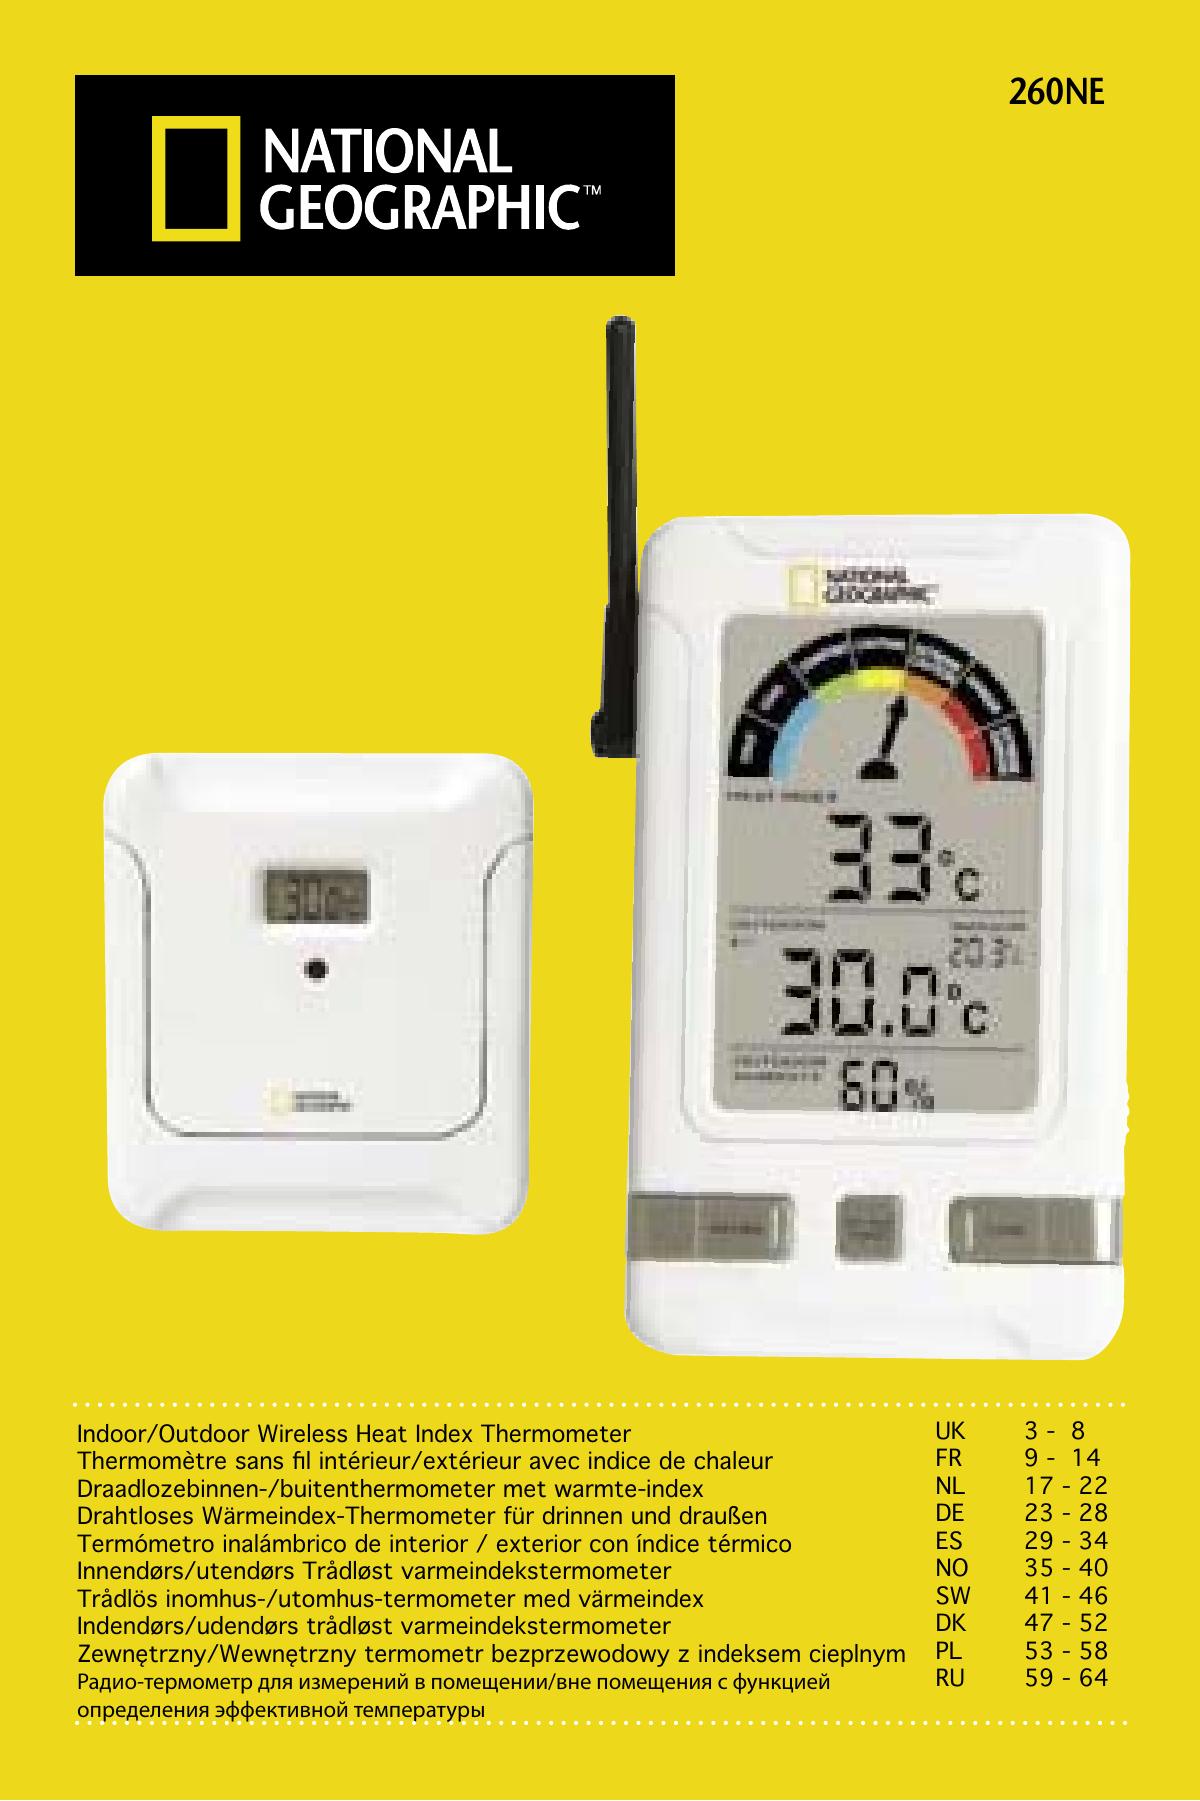 National Geographic 260NE Thermometer User Manual